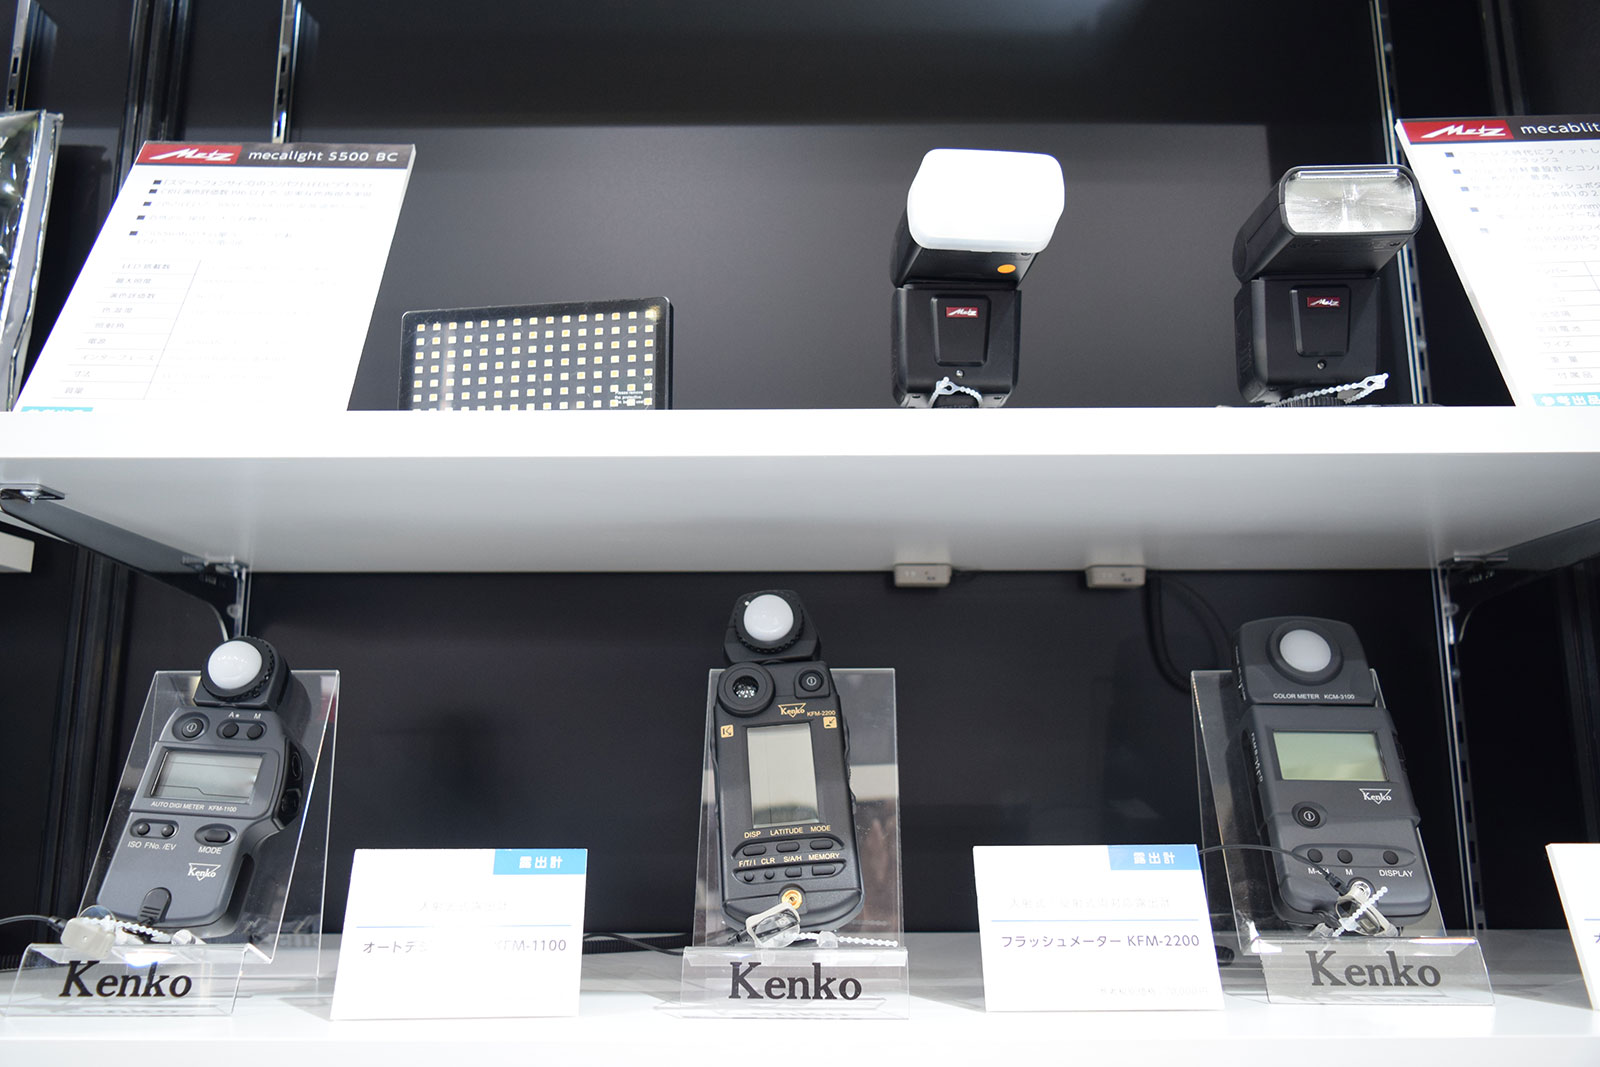 We know exposure, light and color temperature are among the most important factors to consider in photography. In this corner, we therefore displayed our selection of Kenko Color and Flash Meters.